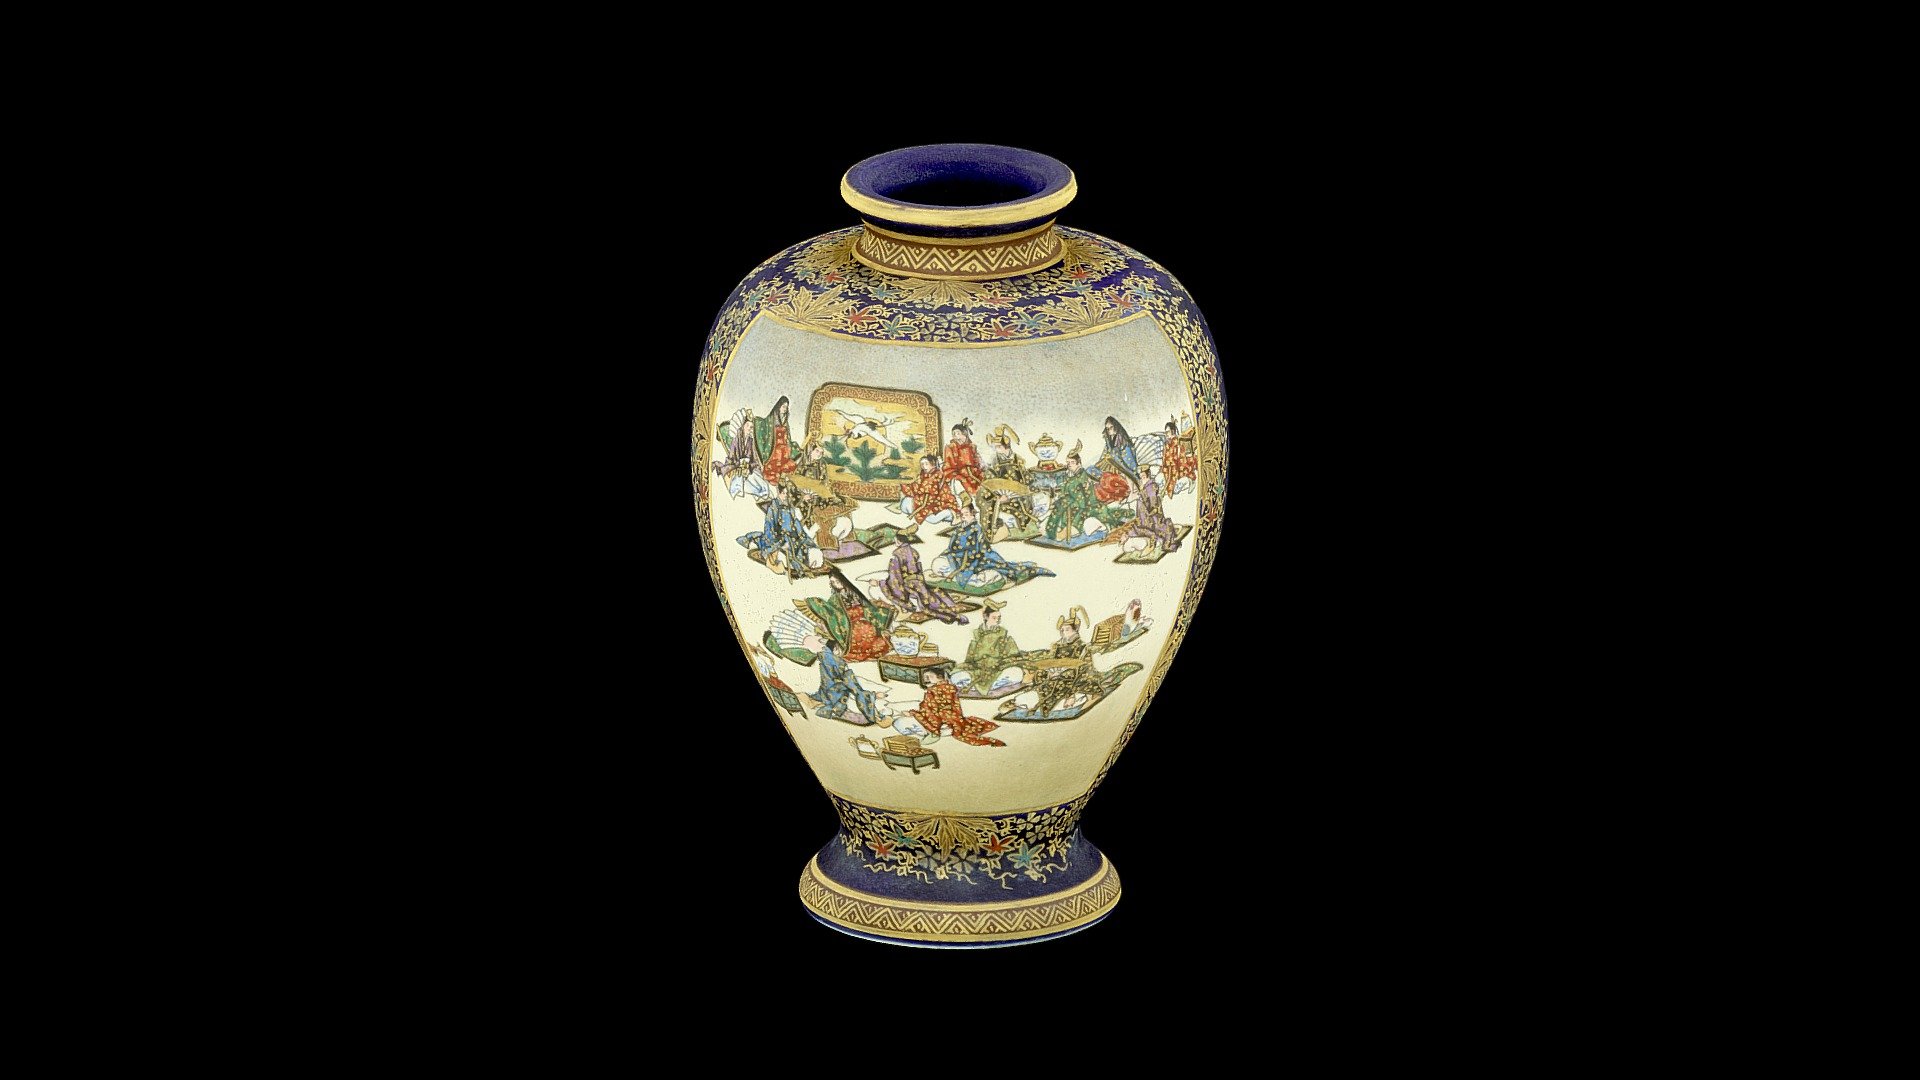 Meiji period (1868-1912)

Of baluster form painted with polychrome enamels and gilt of figures working there daily pursuits , the reverse painted with a rooster amongst blossoming flowers and trees, 

7.6.75 in. (17.14 cm.)high 

Signed KINKOZAN

Created in RealityCapture by Capturing Reality from 593 images in 01h:20m:09s 3d model